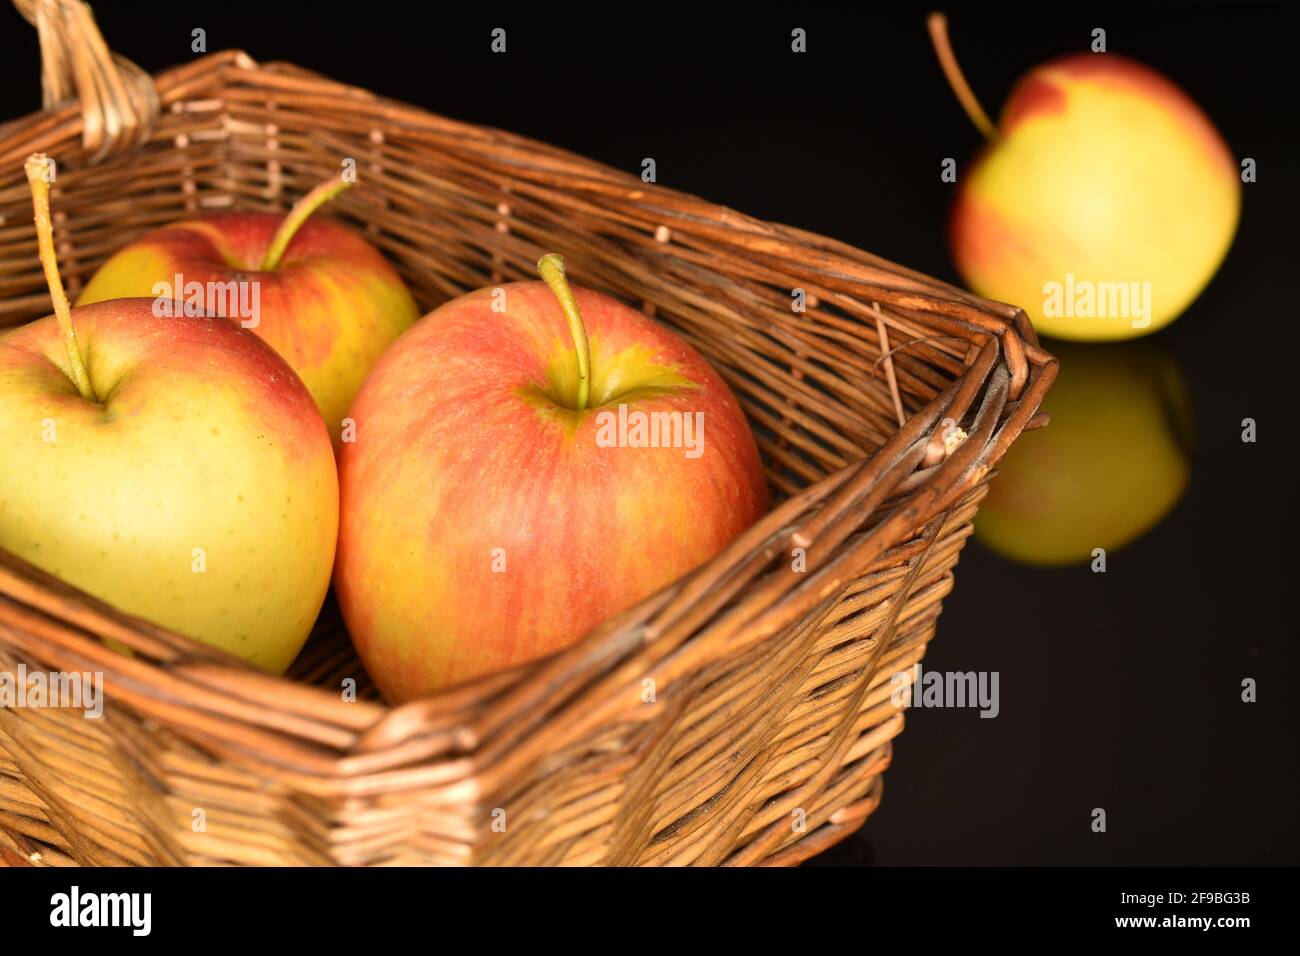 A few ripe organic, juicy, aromatic apples in a wicker basket of vines, close-up, on a black background. Stock Photo